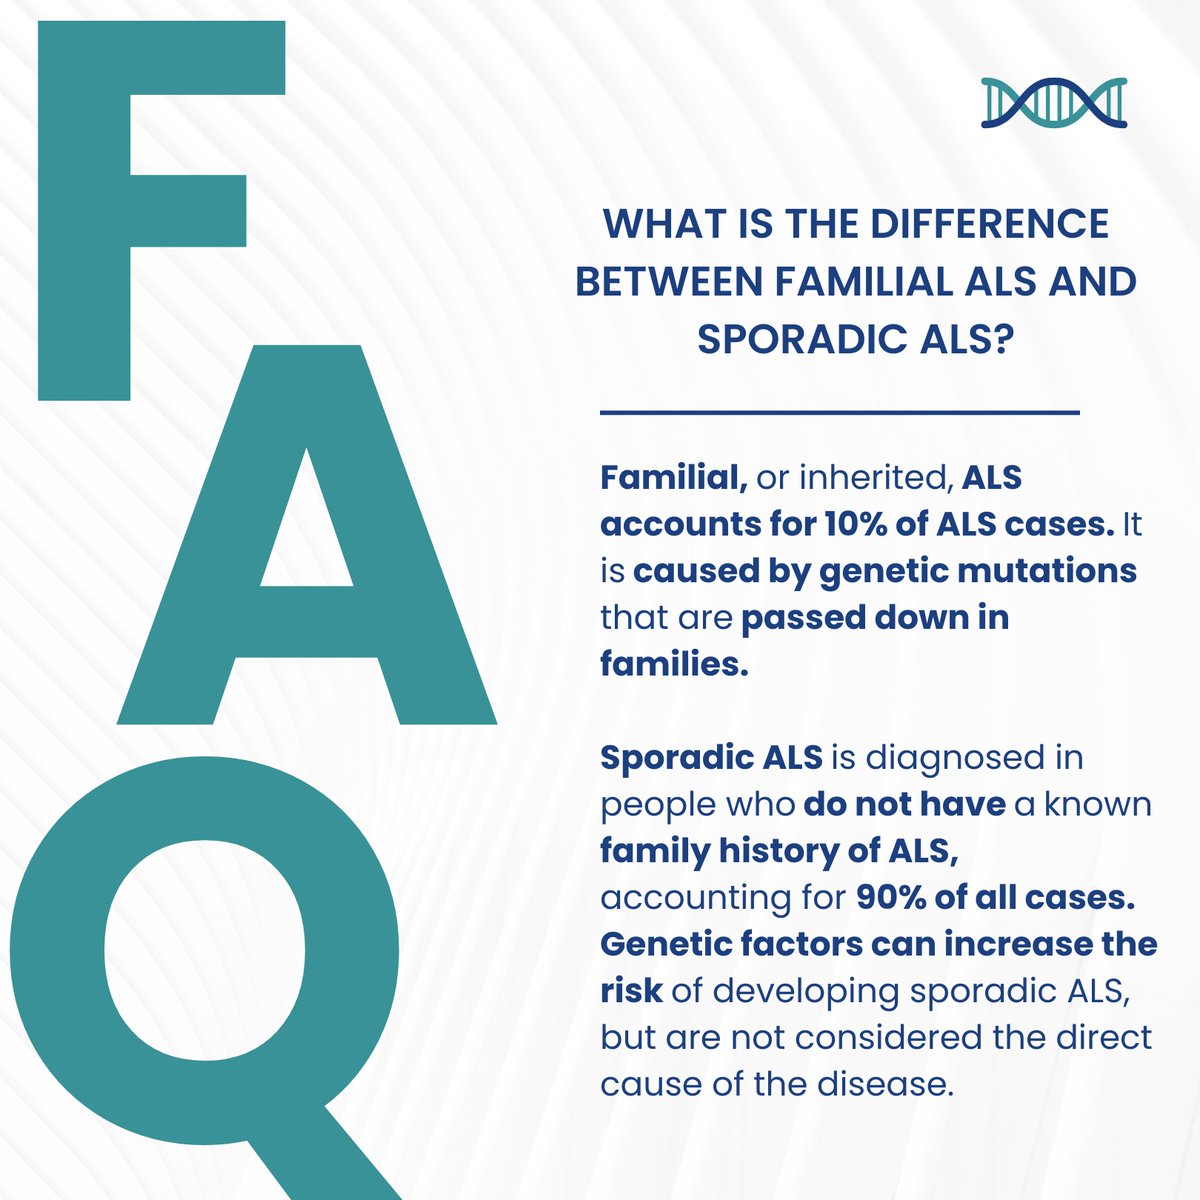 What is the difference between familial ALS and sporadic ALS? Familial ALS is caused by mutations passed down in families. Sporadic ALS is diagnosed in 90% of cases where there is no family history of ALS. Read more ALS FAQs: targetals.org/faq/ #ALS #ALSFacts #ALSFAQ